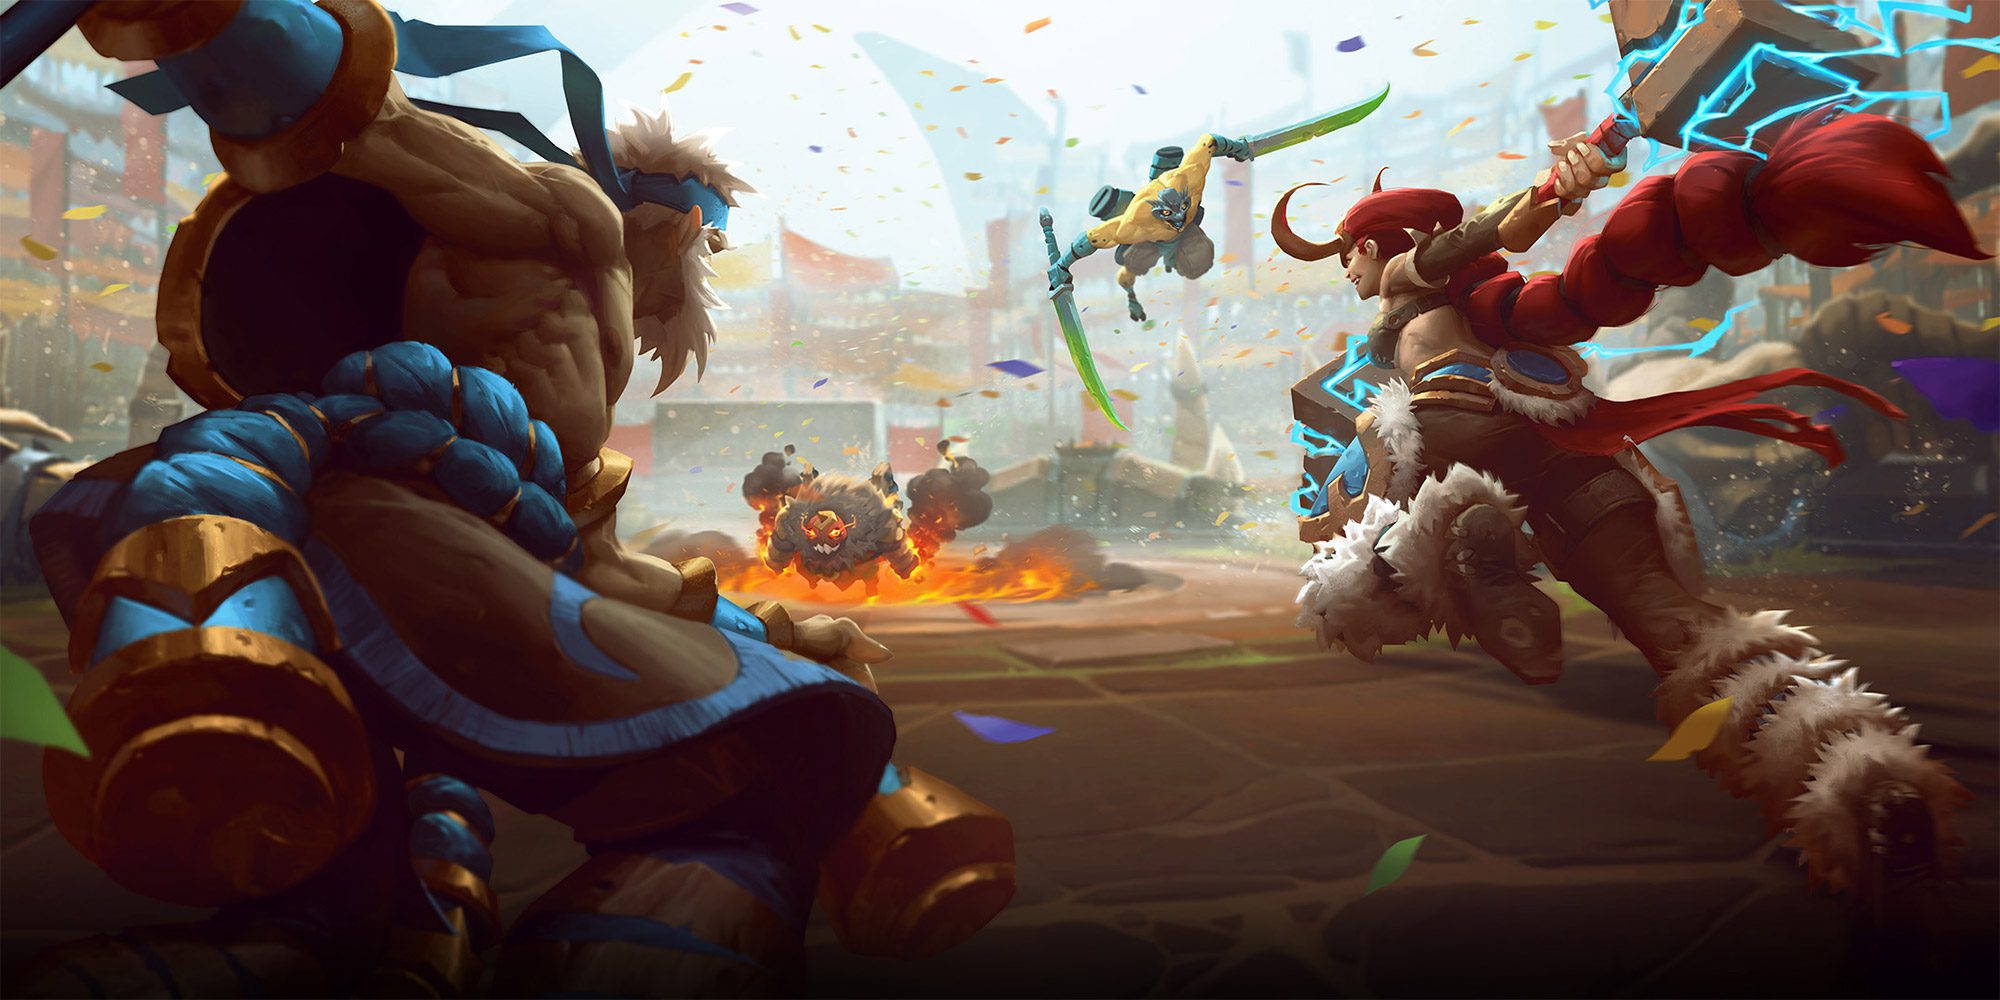 Stunlock Partners with Twitch and Nexon for Inaugural Battlerite Pro League